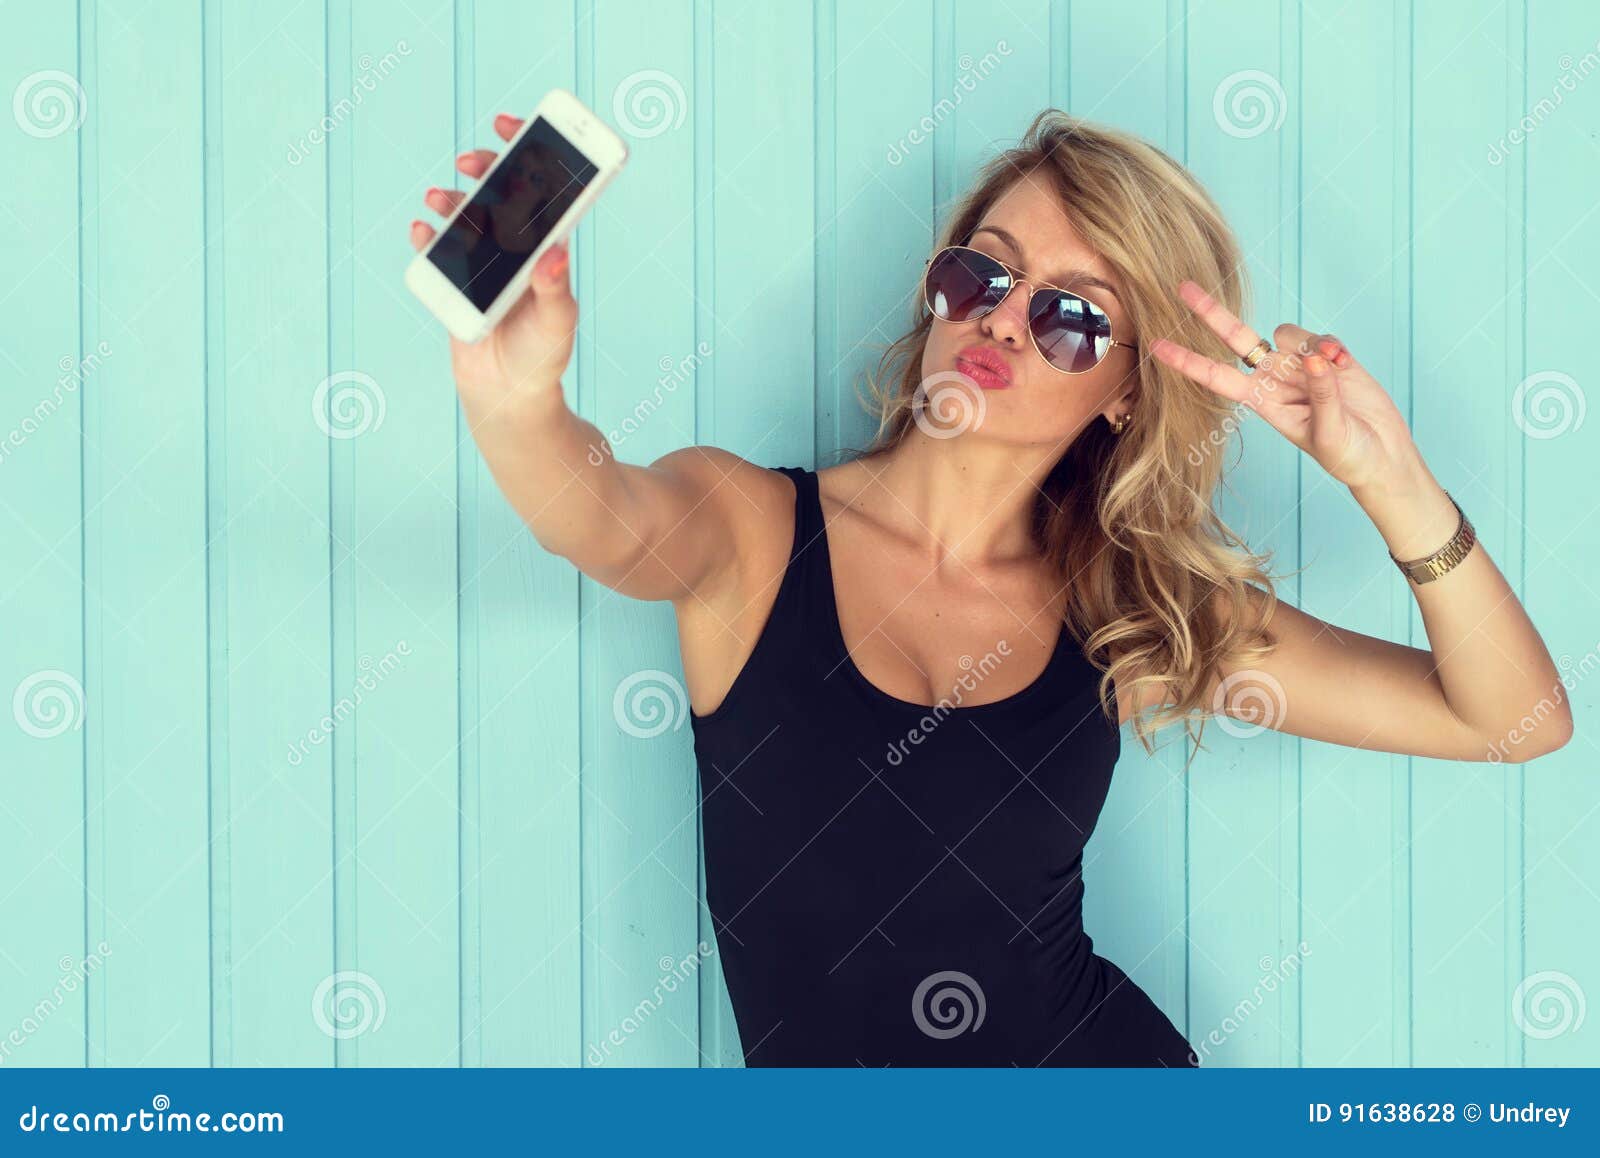 blonde woman in bodysuit with perfect body taking selfie smartphone toned instagram filter